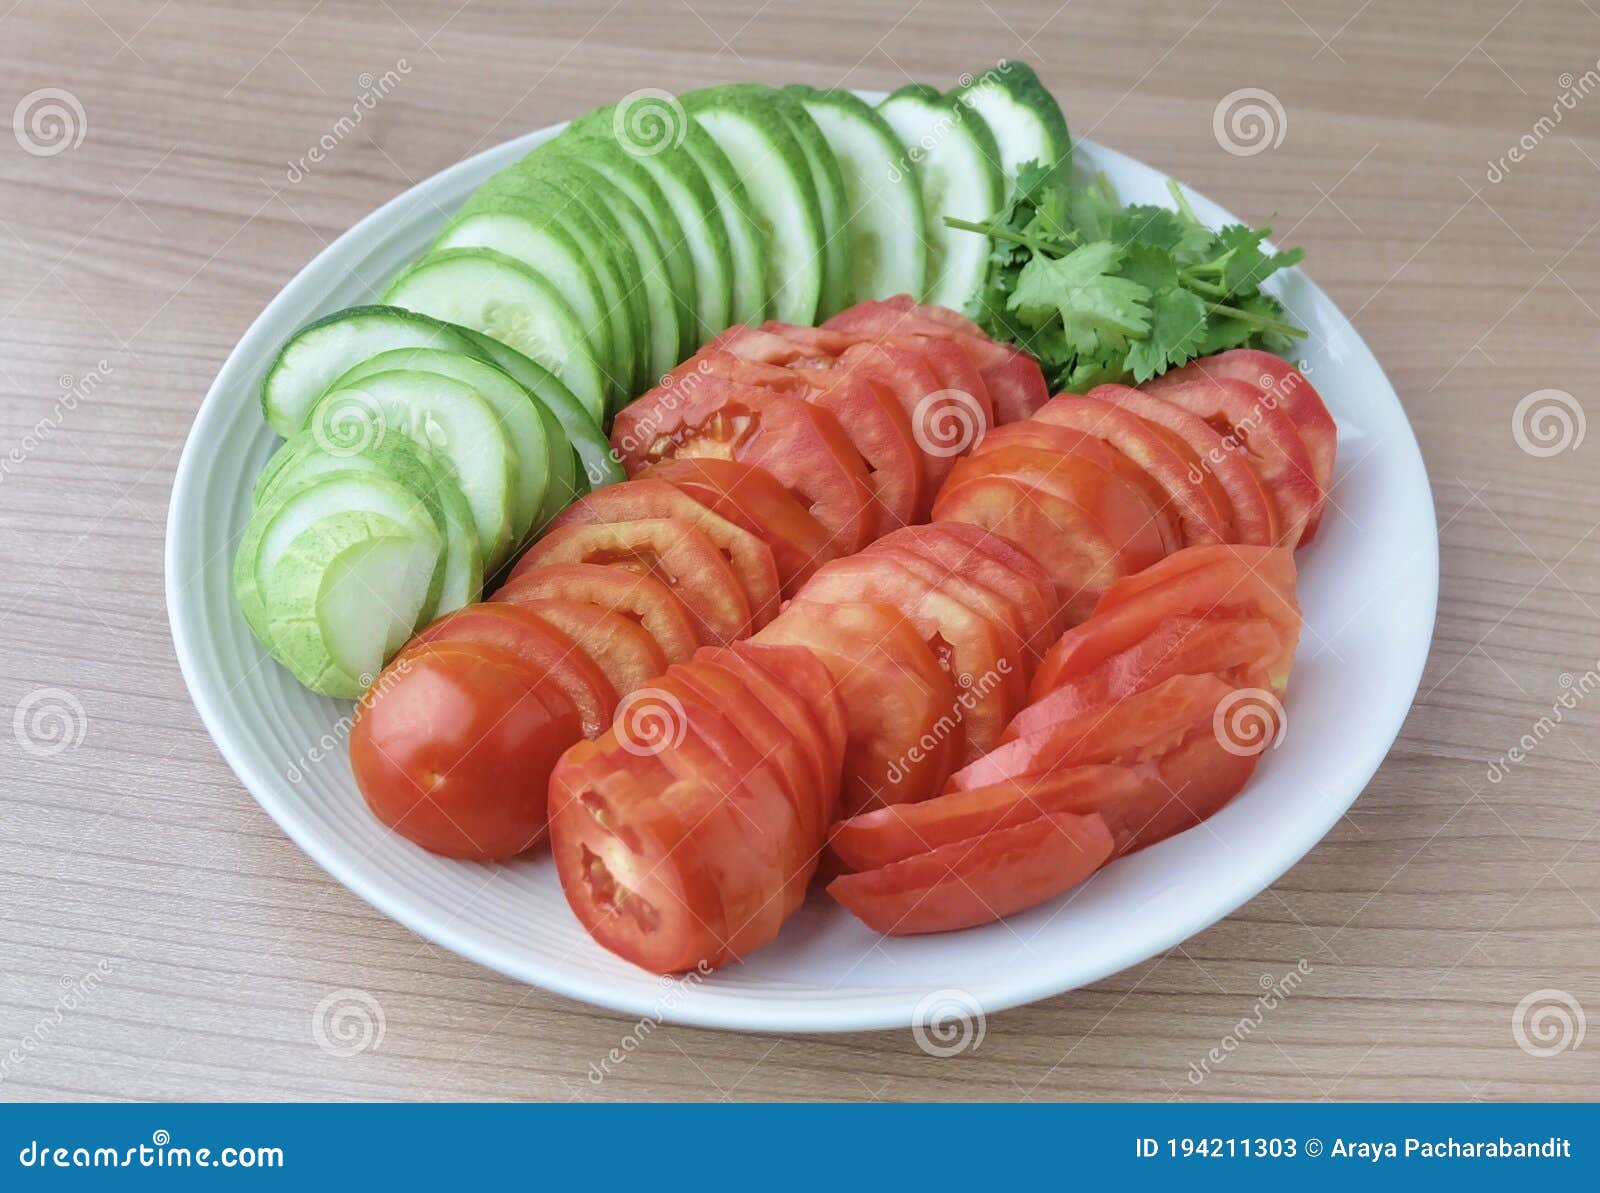 slice tomatoes, cucumbers with corianders on dish